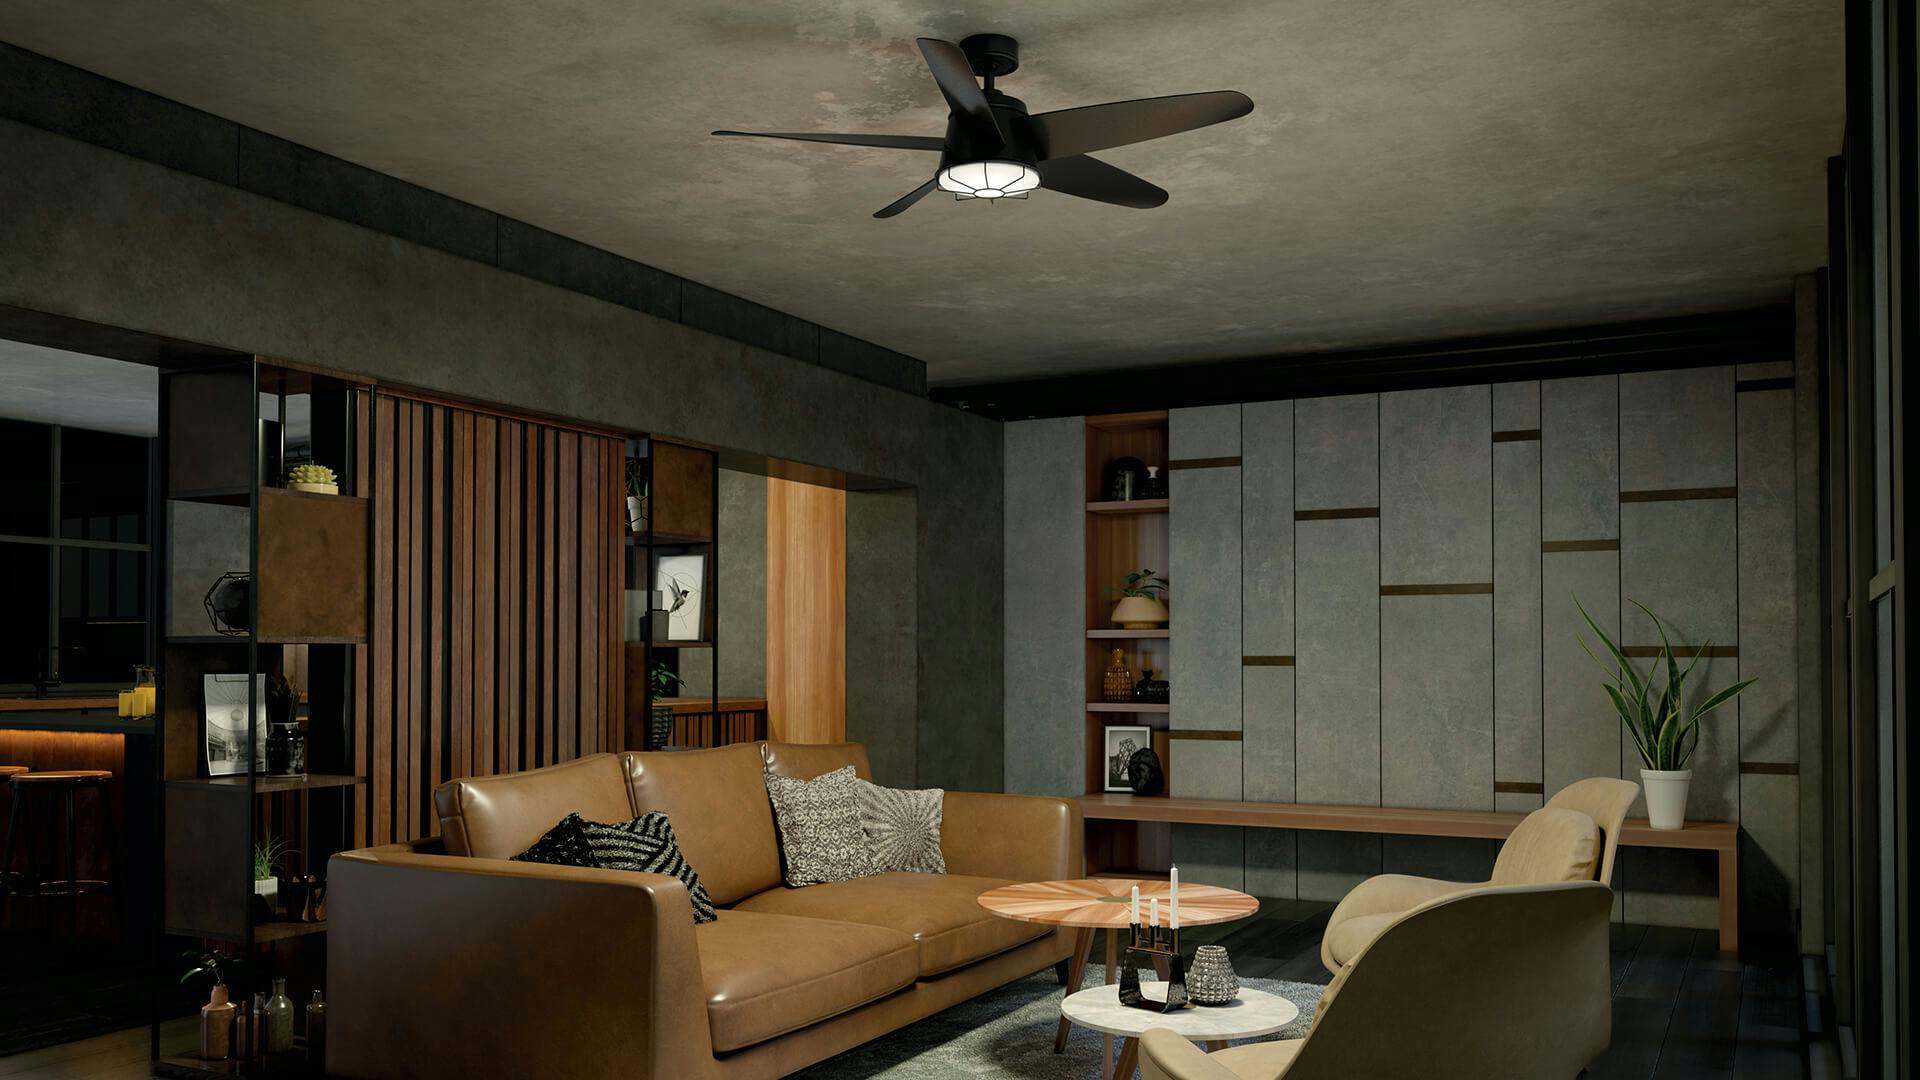 Retro style paneled walled room with a leather couch and featuring a Daya ceiling fan at night